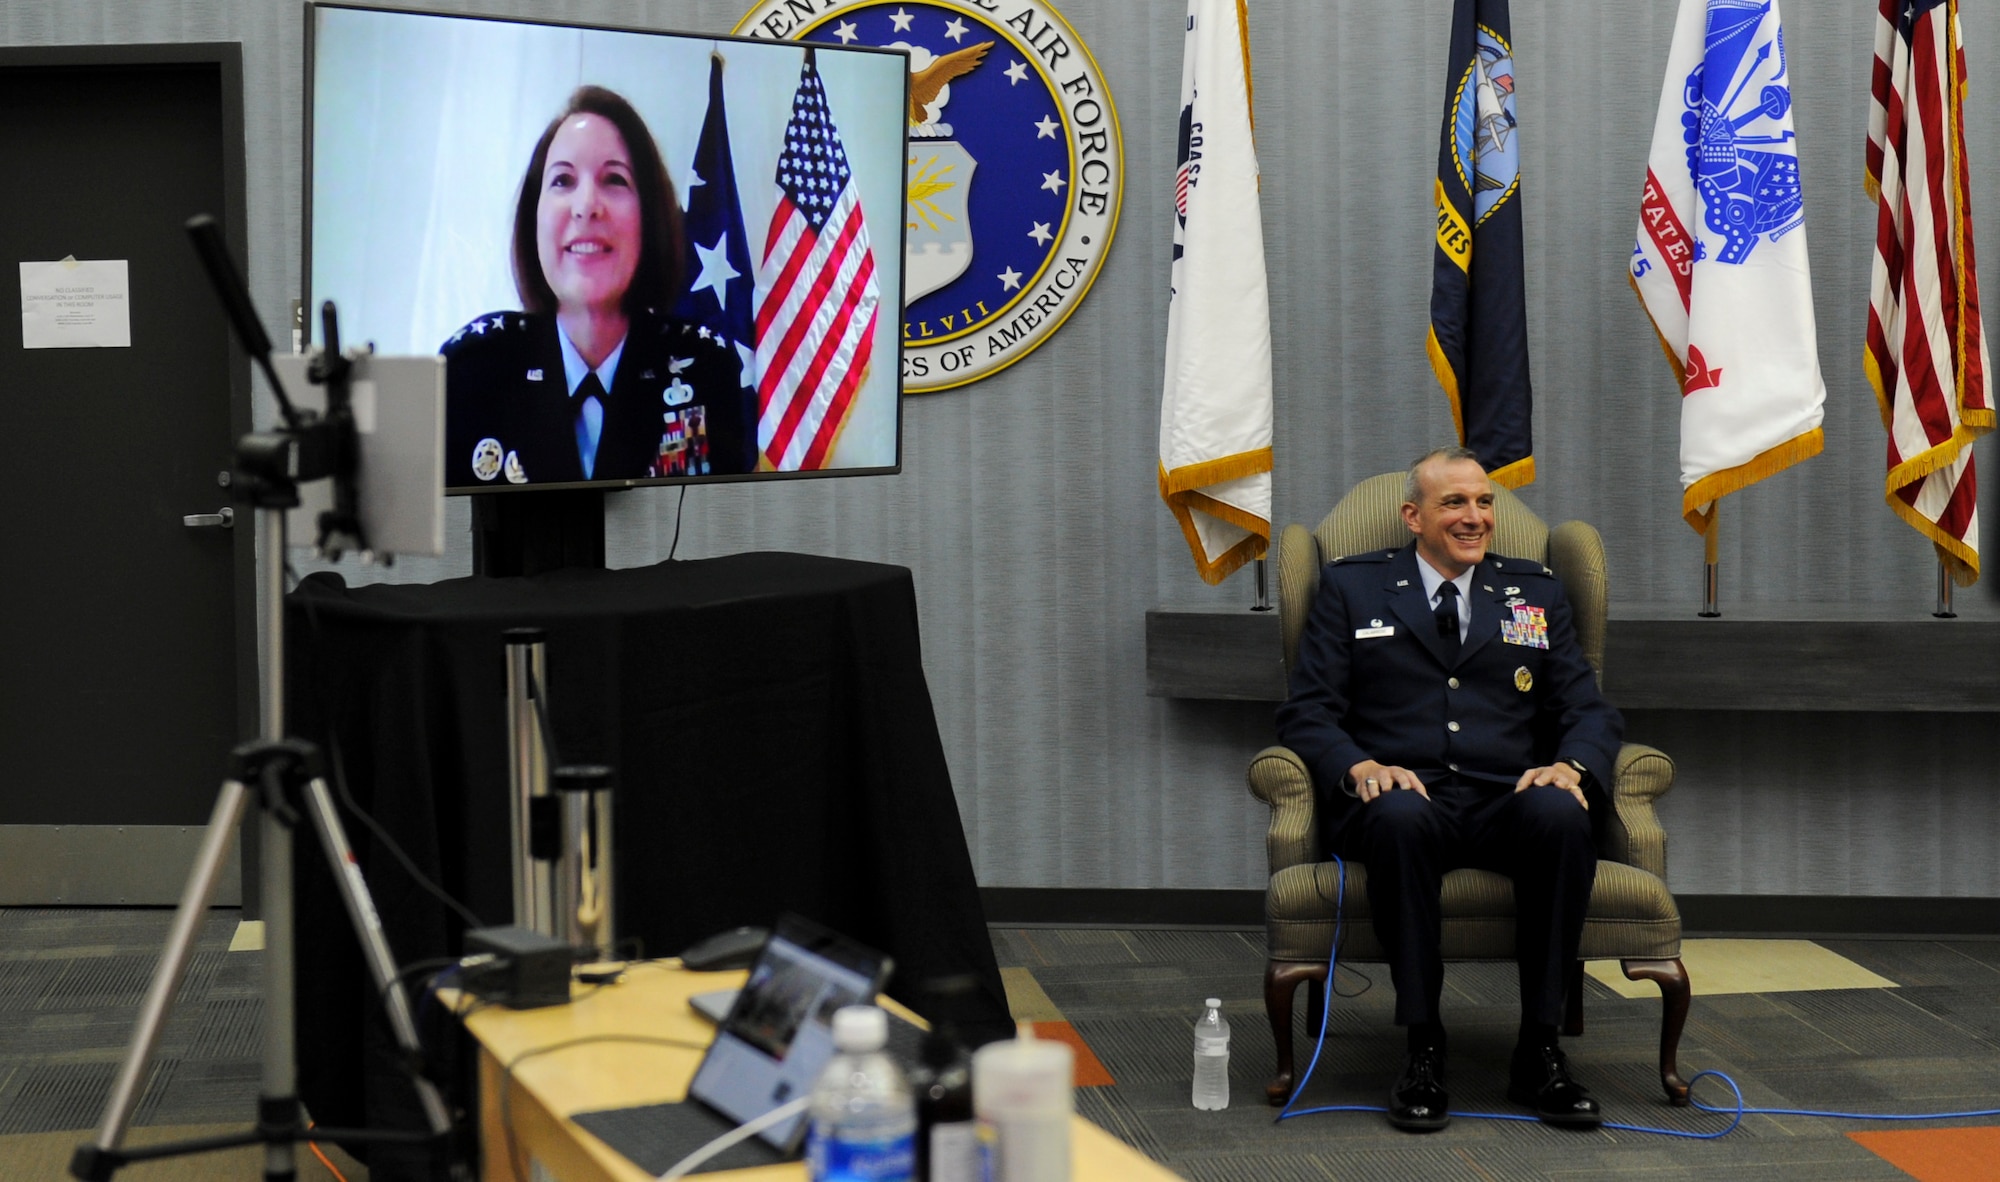 Lt. Gen. Mary O’Brien, Deputy Chief of Staff for Intelligence, Surveillance, Reconnaissance and Cyber Effects Operations, officiates the assumption ceremony for Col. Maurizio D. Calabrese as he takes command of the National Air and Space Intelligence Center June 9, 2020.